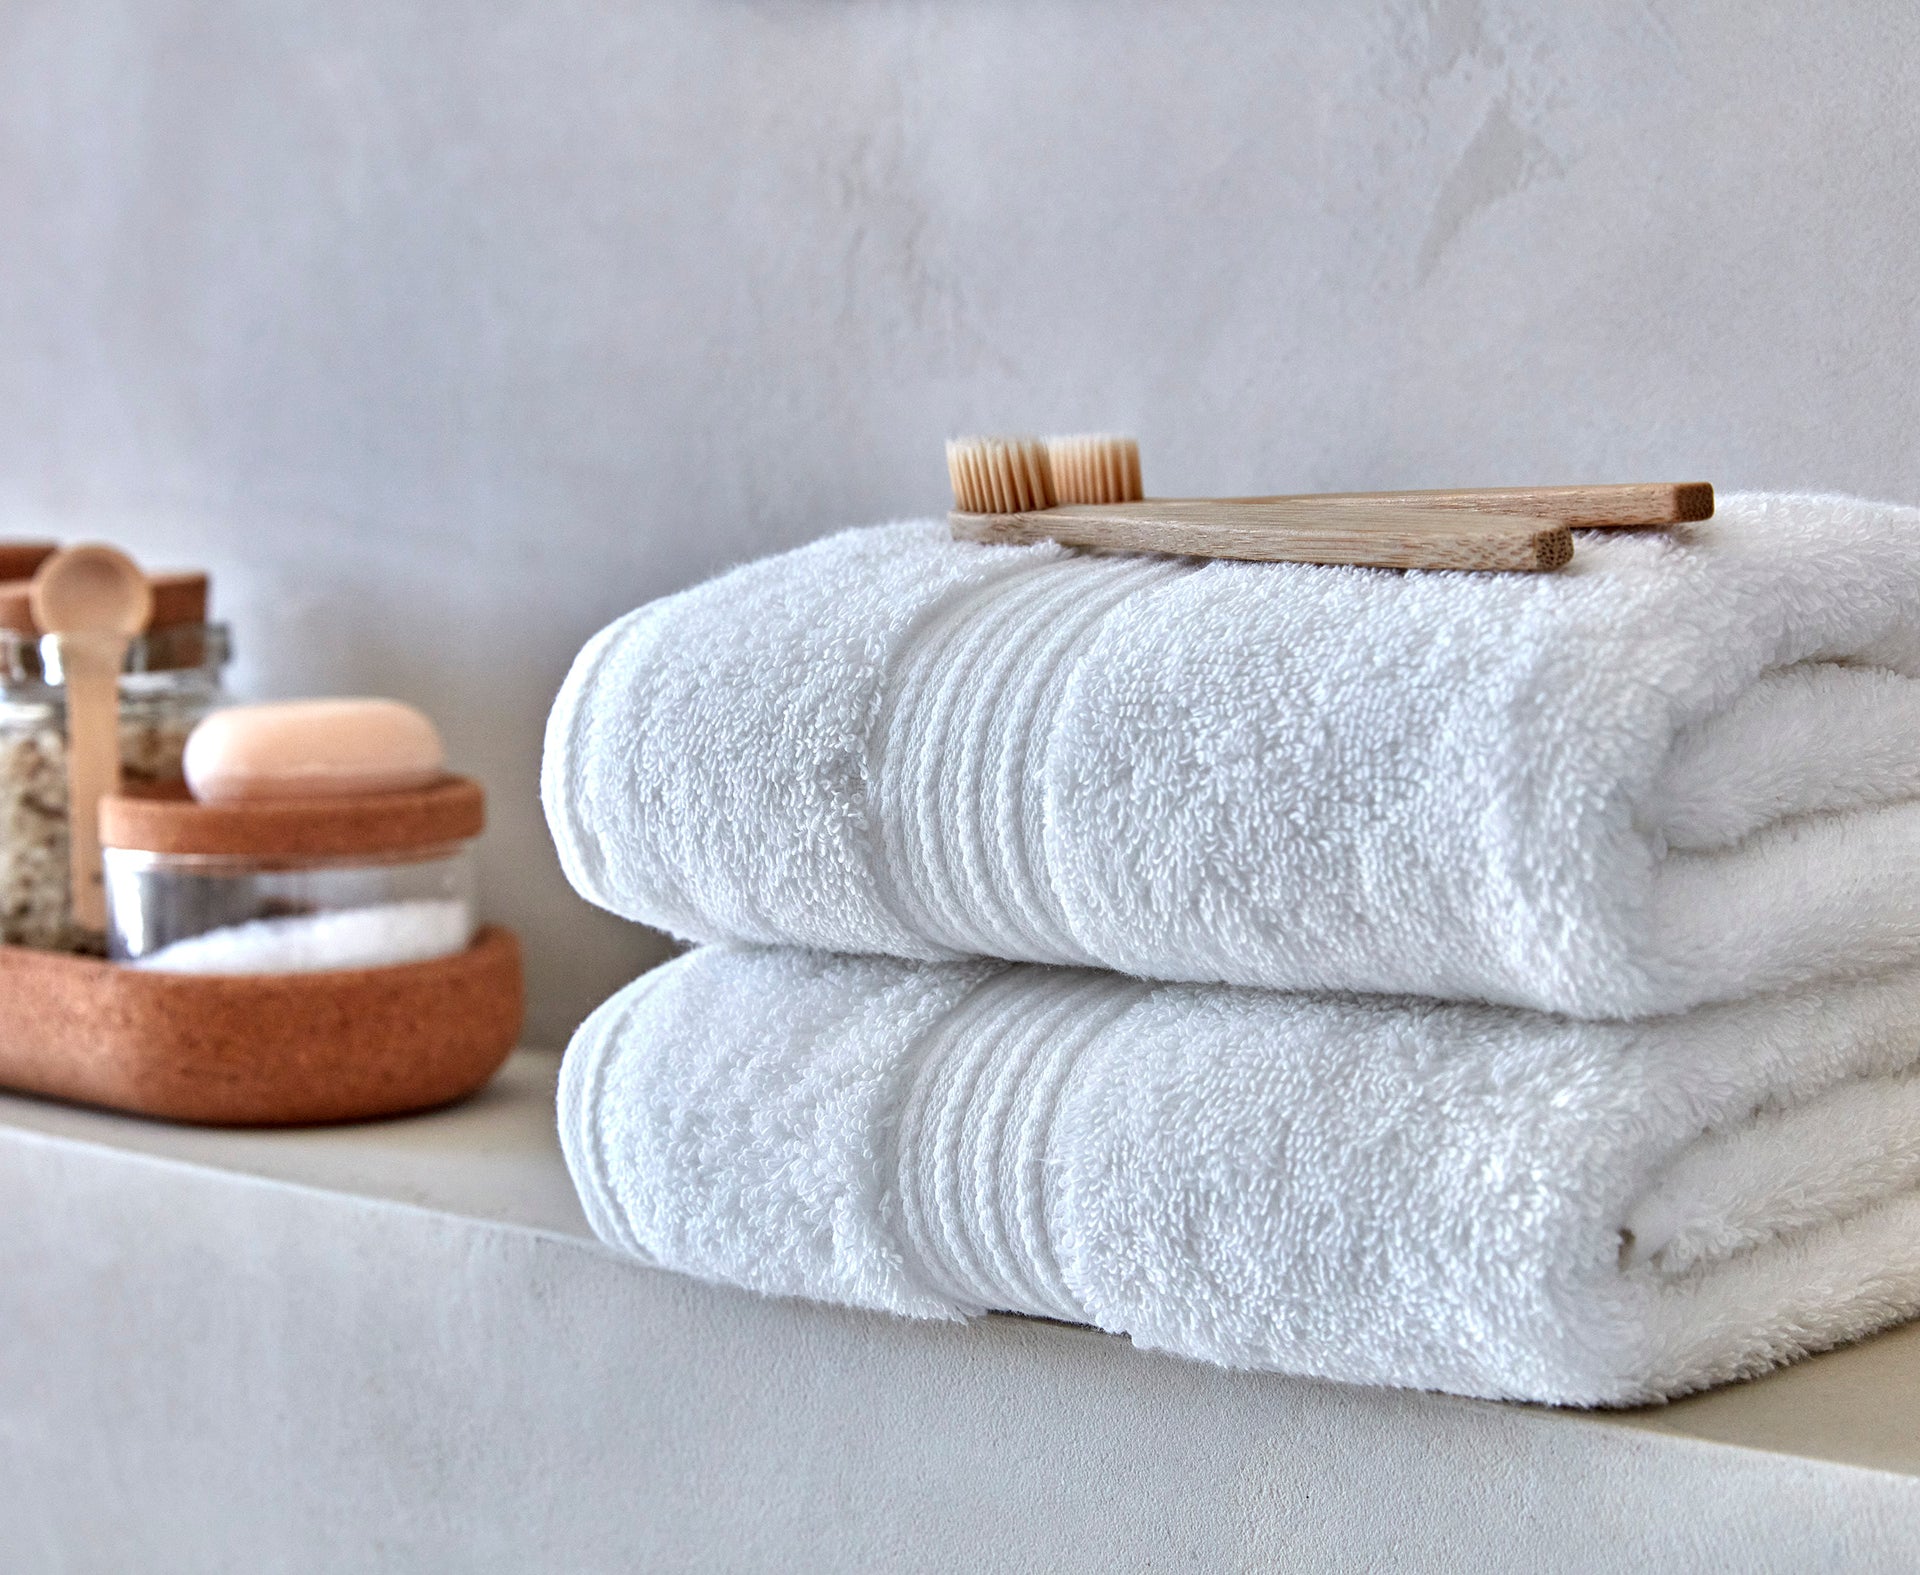 Things That Inspire: Hand towels: where do you put them?